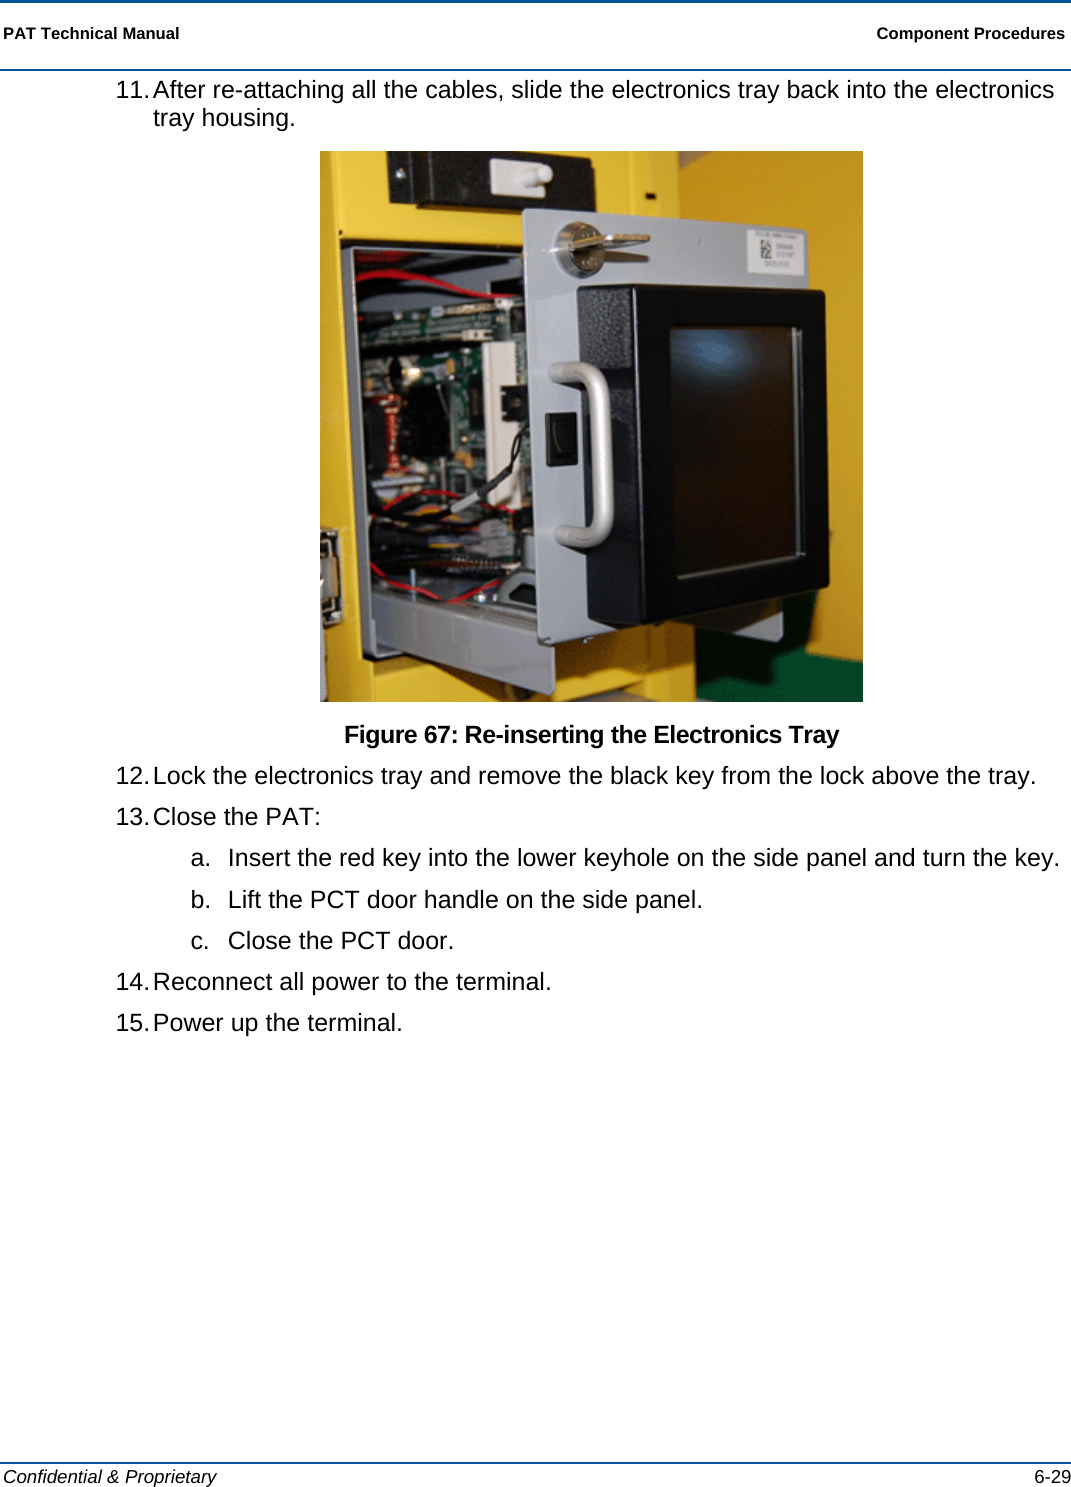  PAT Technical Manual  Component Procedures  Confidential &amp; Proprietary   6-29 11. After re-attaching all the cables, slide the electronics tray back into the electronics tray housing.  Figure 67: Re-inserting the Electronics Tray 12. Lock the electronics tray and remove the black key from the lock above the tray. 13. Close the PAT: a.  Insert the red key into the lower keyhole on the side panel and turn the key. b.  Lift the PCT door handle on the side panel. c.  Close the PCT door.  14. Reconnect all power to the terminal. 15. Power up the terminal. 